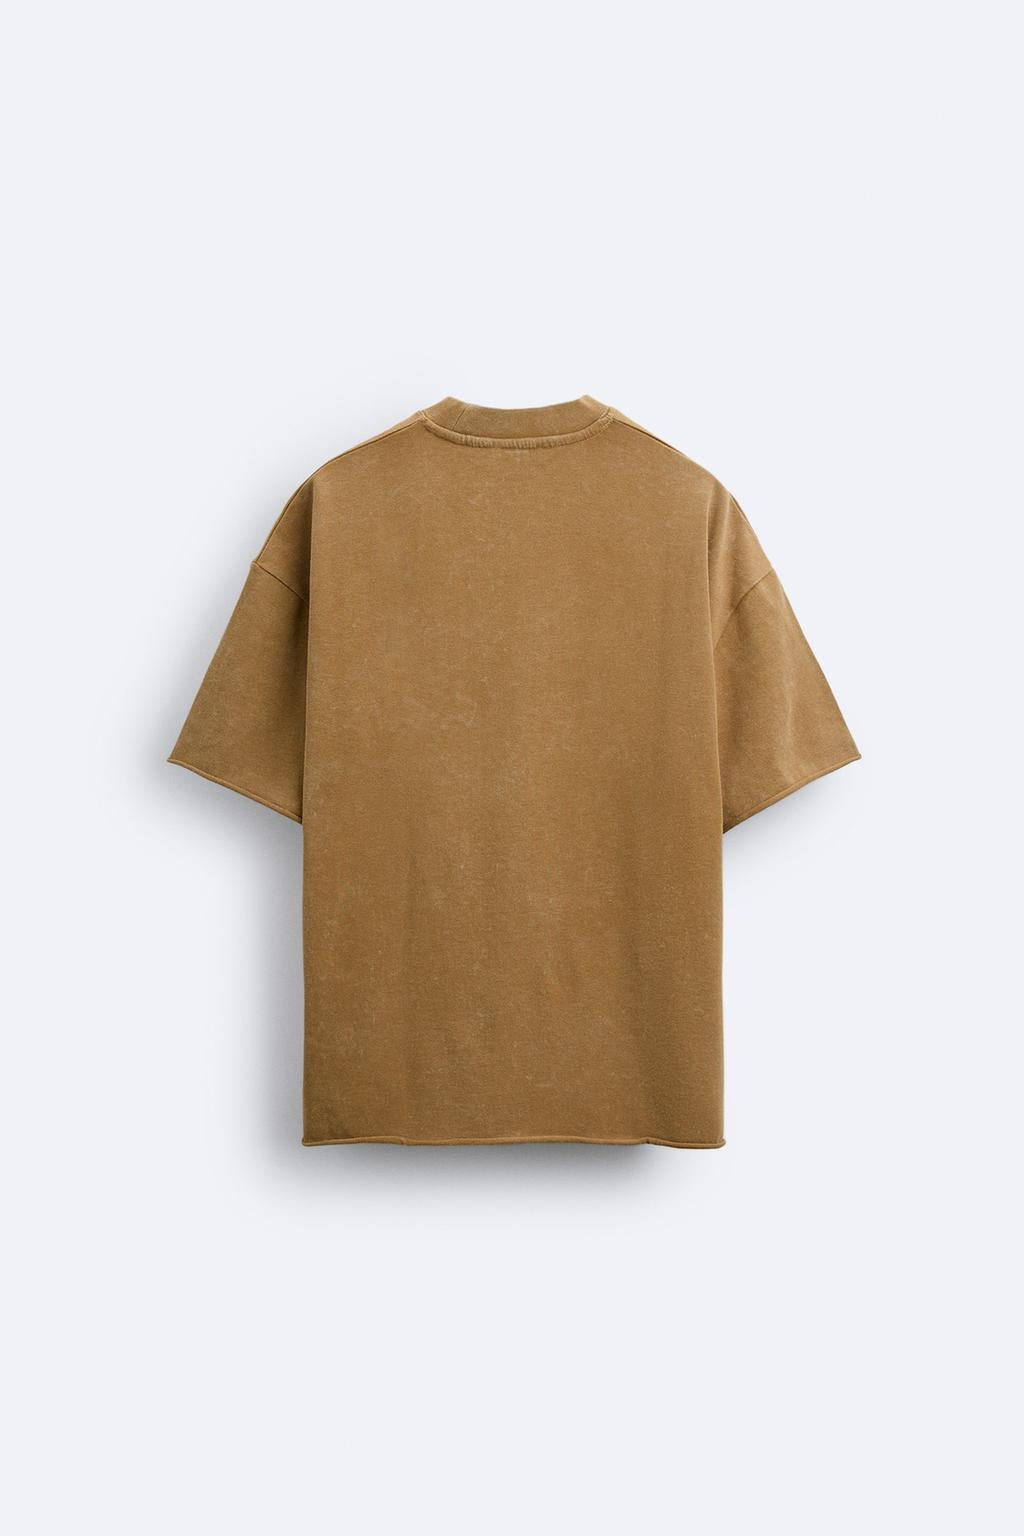 Zara tshirt with printed patch Brown